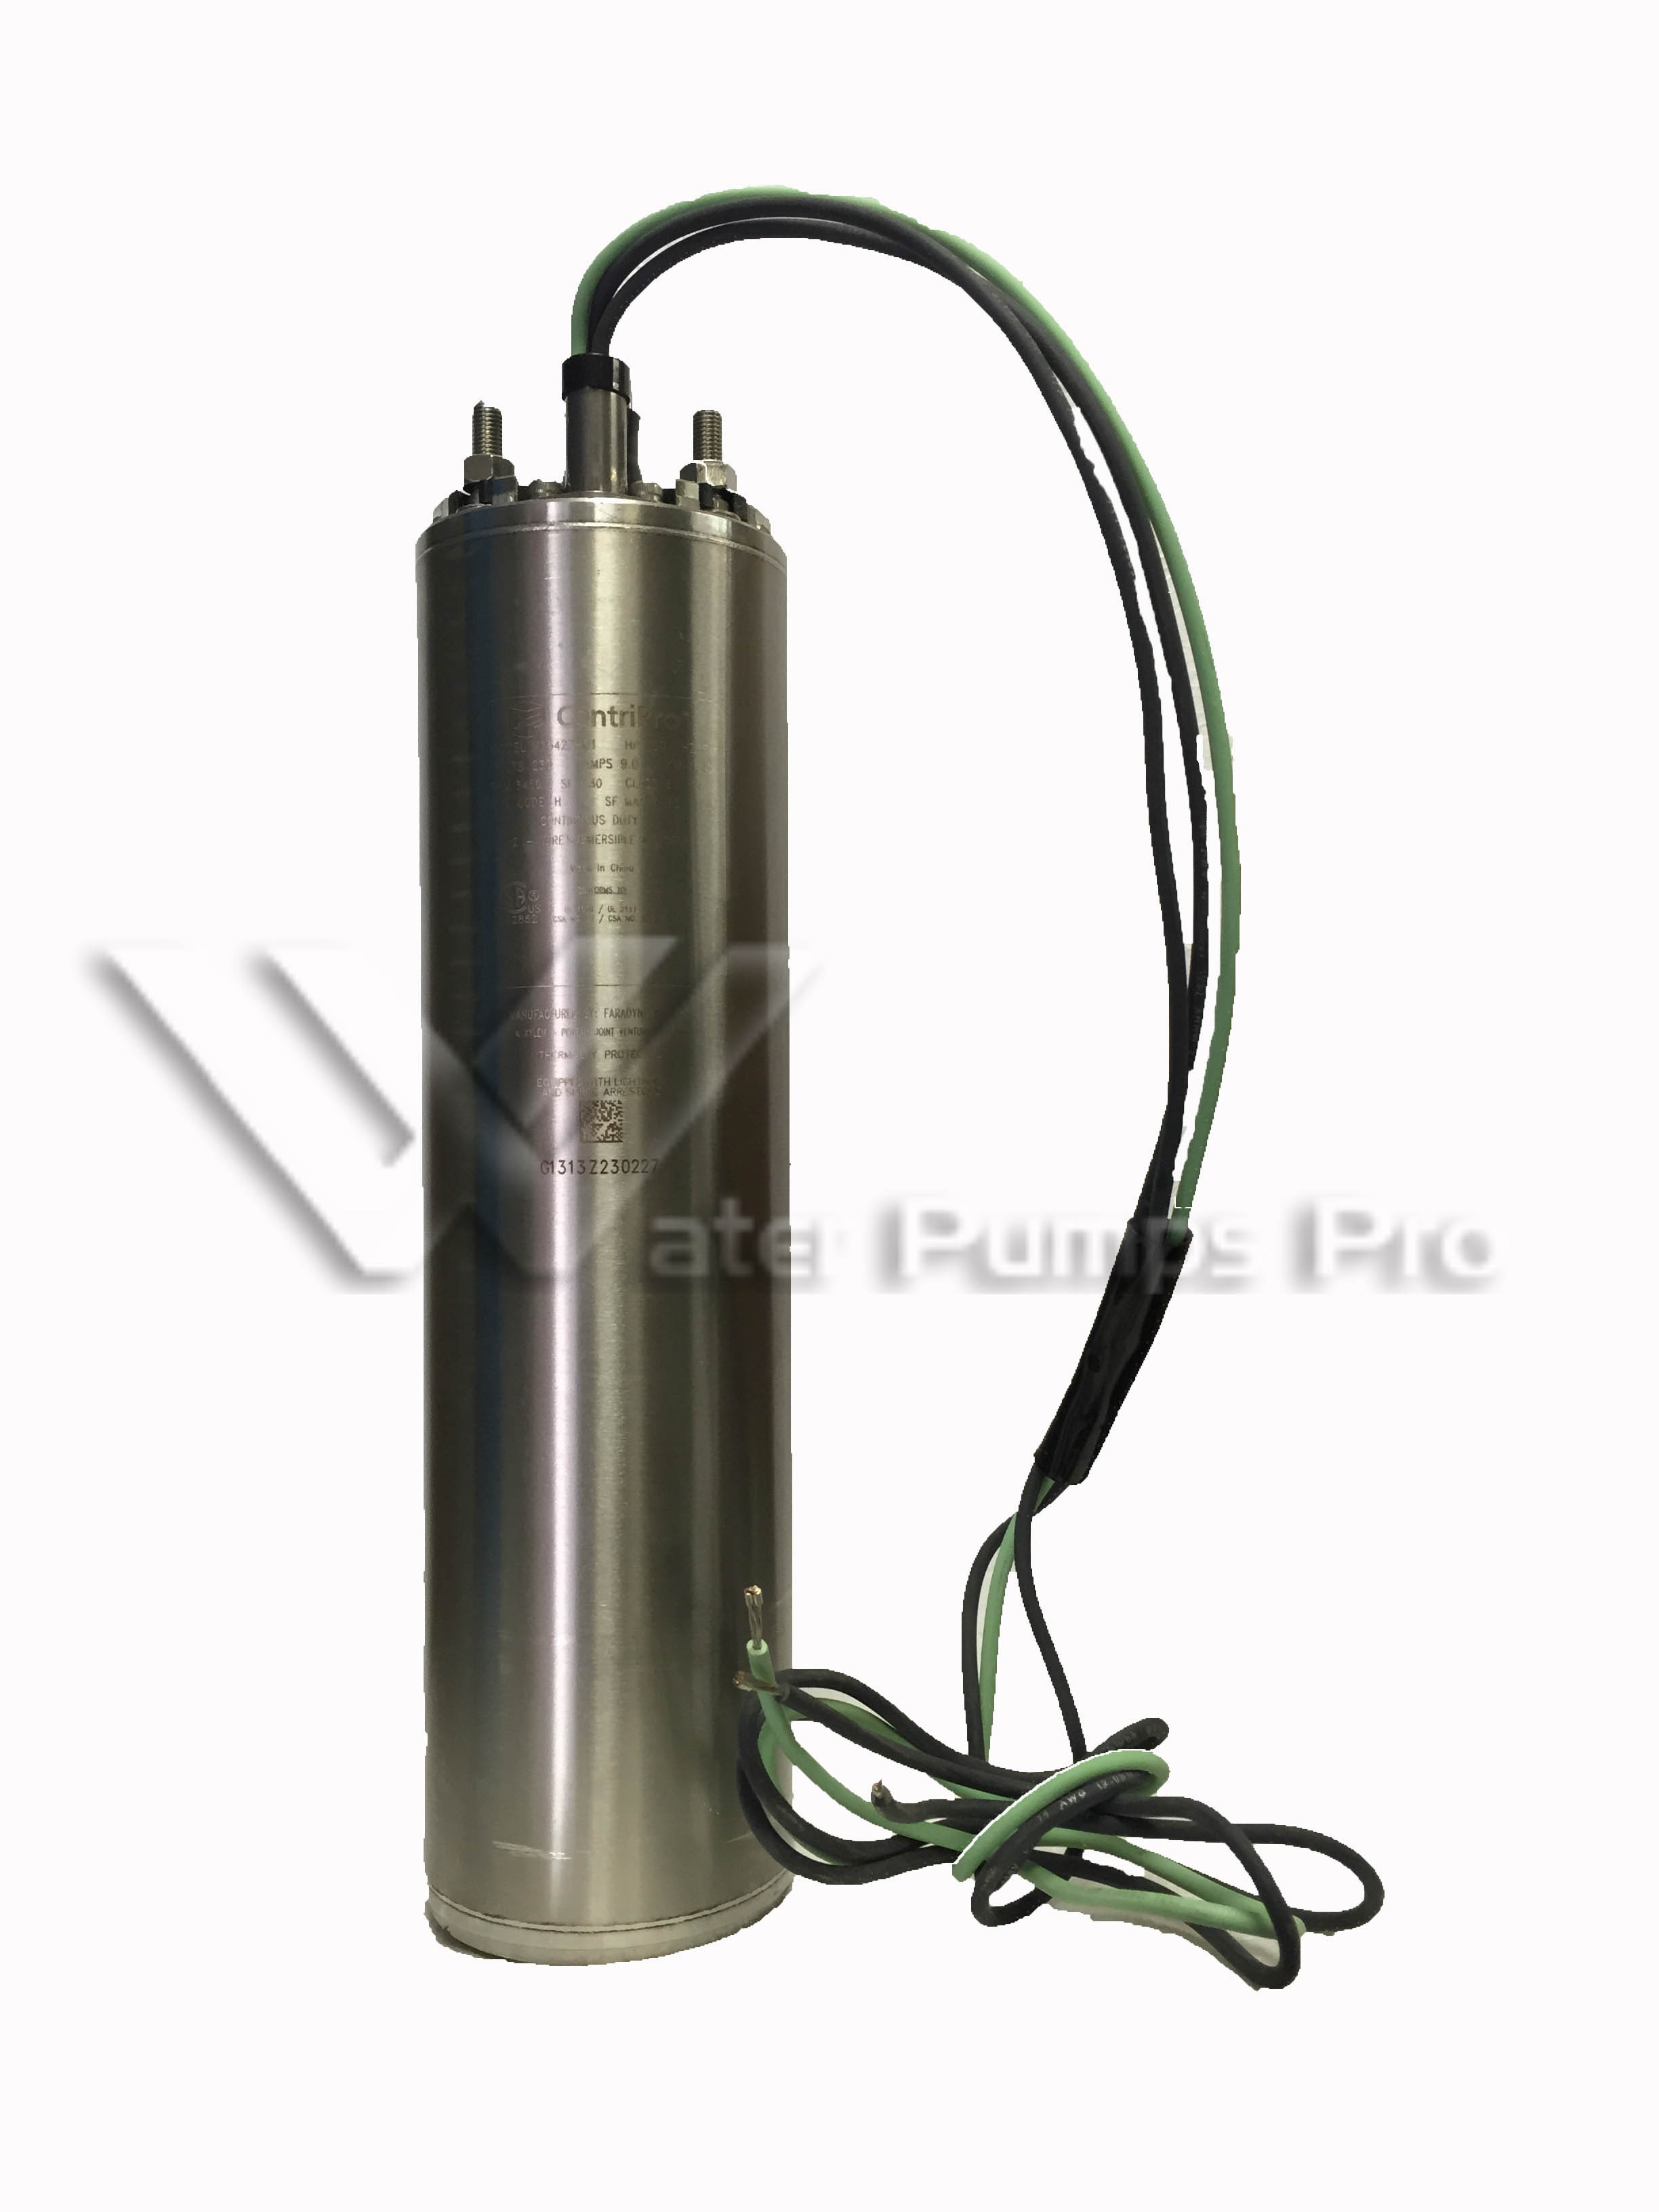 Goulds M07422 3/4HP 4" Submersible Motor 230V 2 Wire 1Phase 60Hz